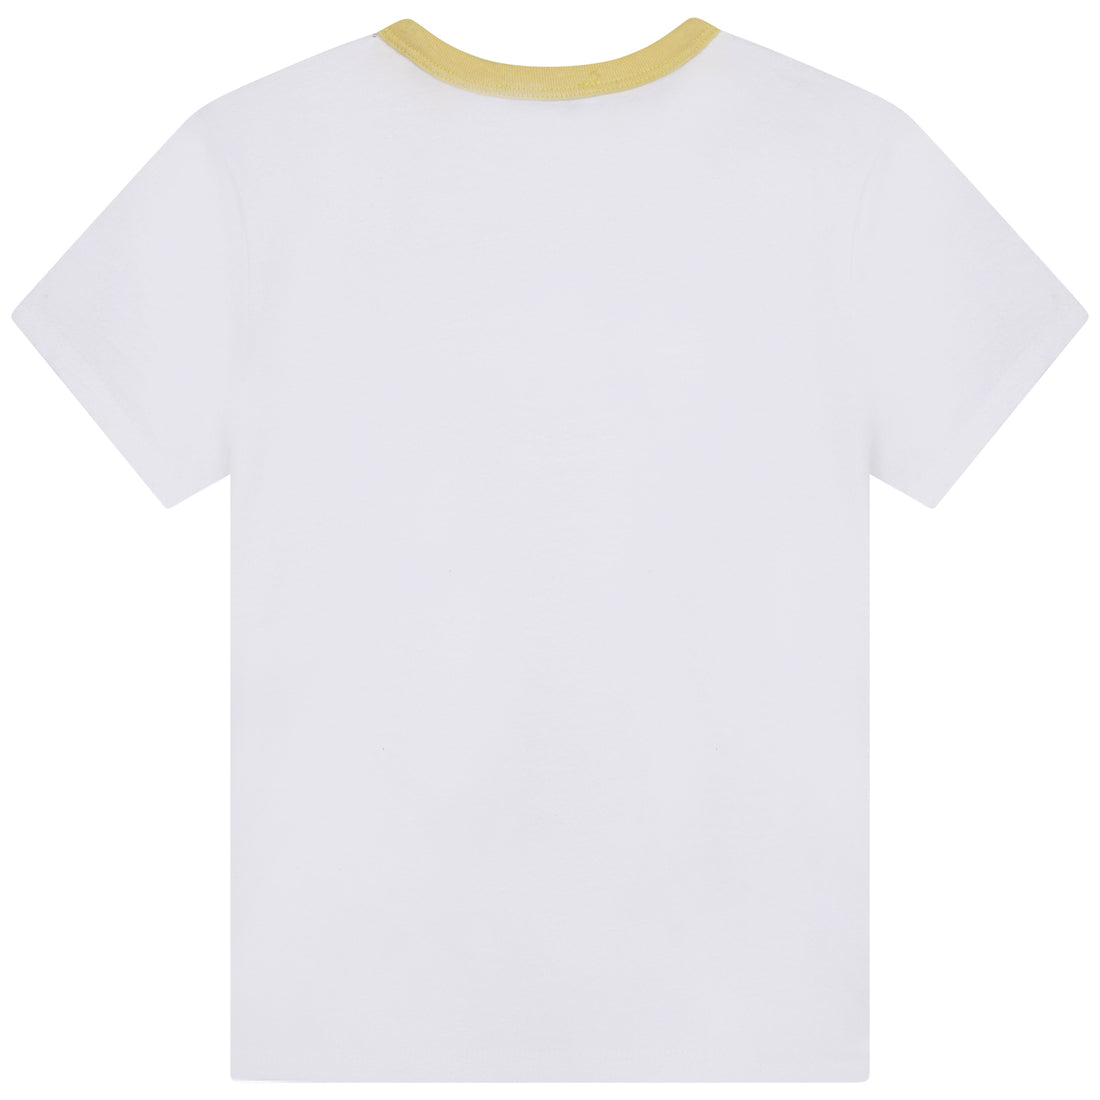 The Marc Jacobs Short Sleeves Tee-Shirt Style: W15614